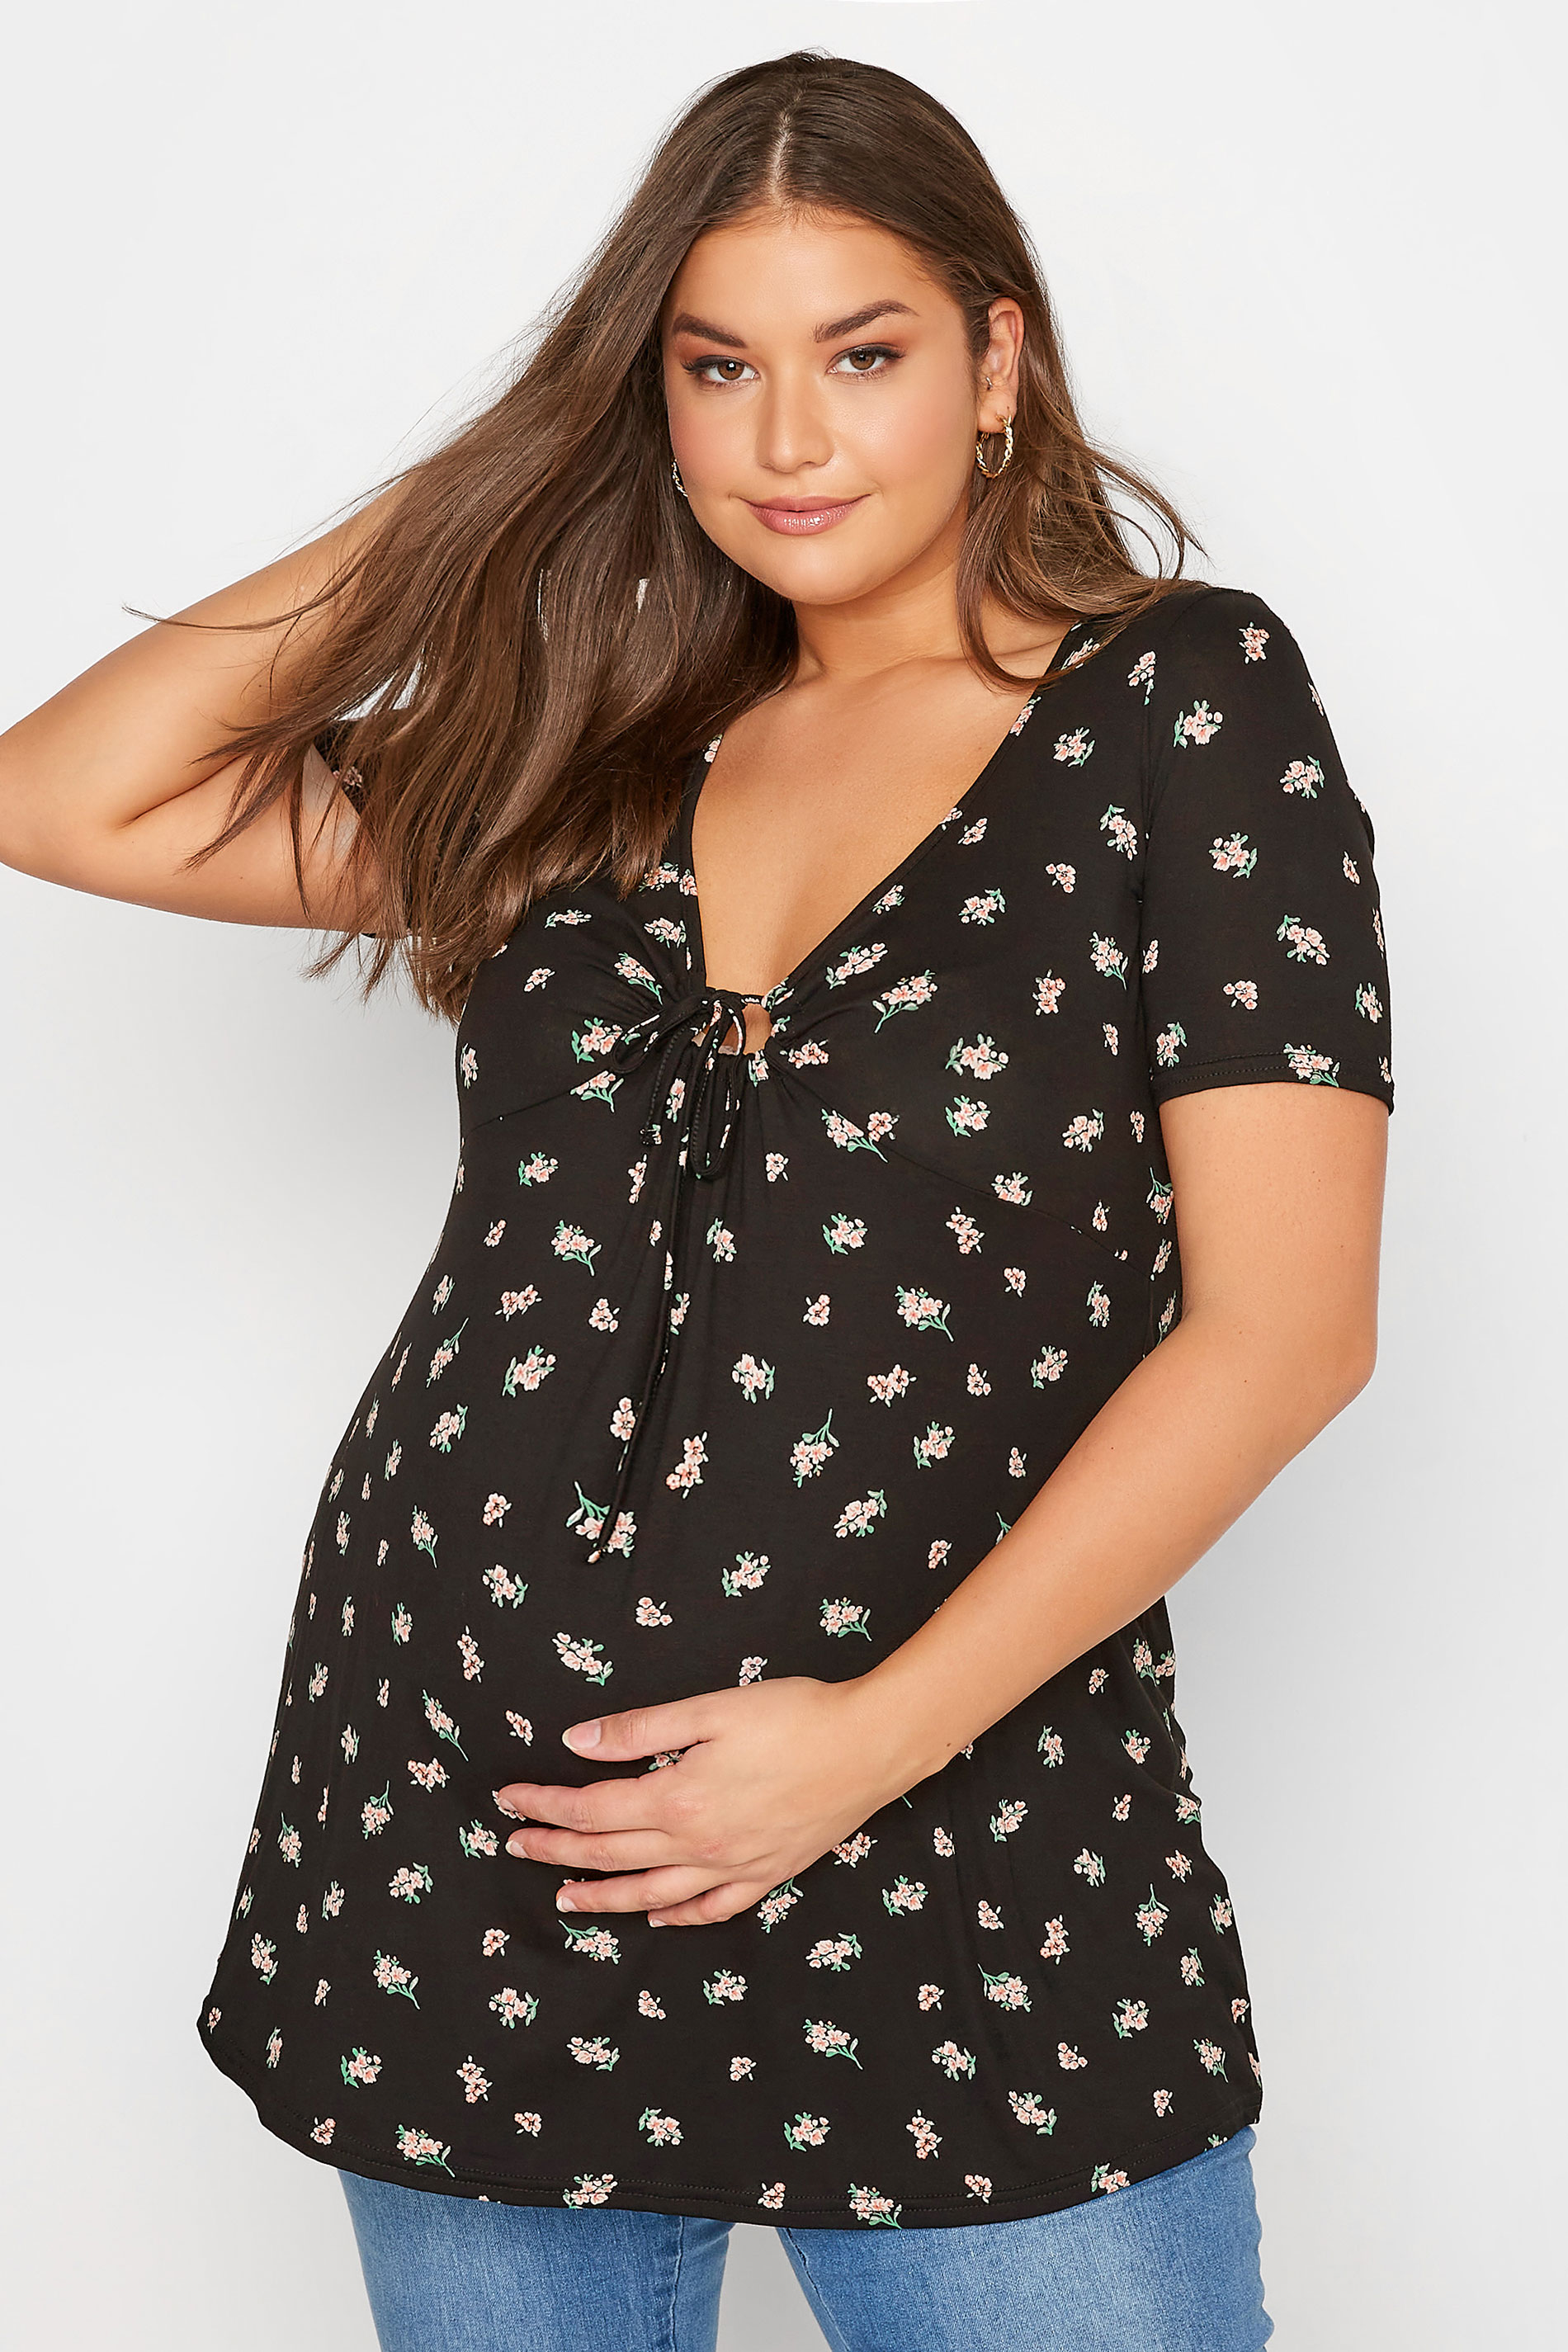 BUMP IT UP MATERNITY Plus Size Black Floral Keyhole Top | Yours Clothing 1